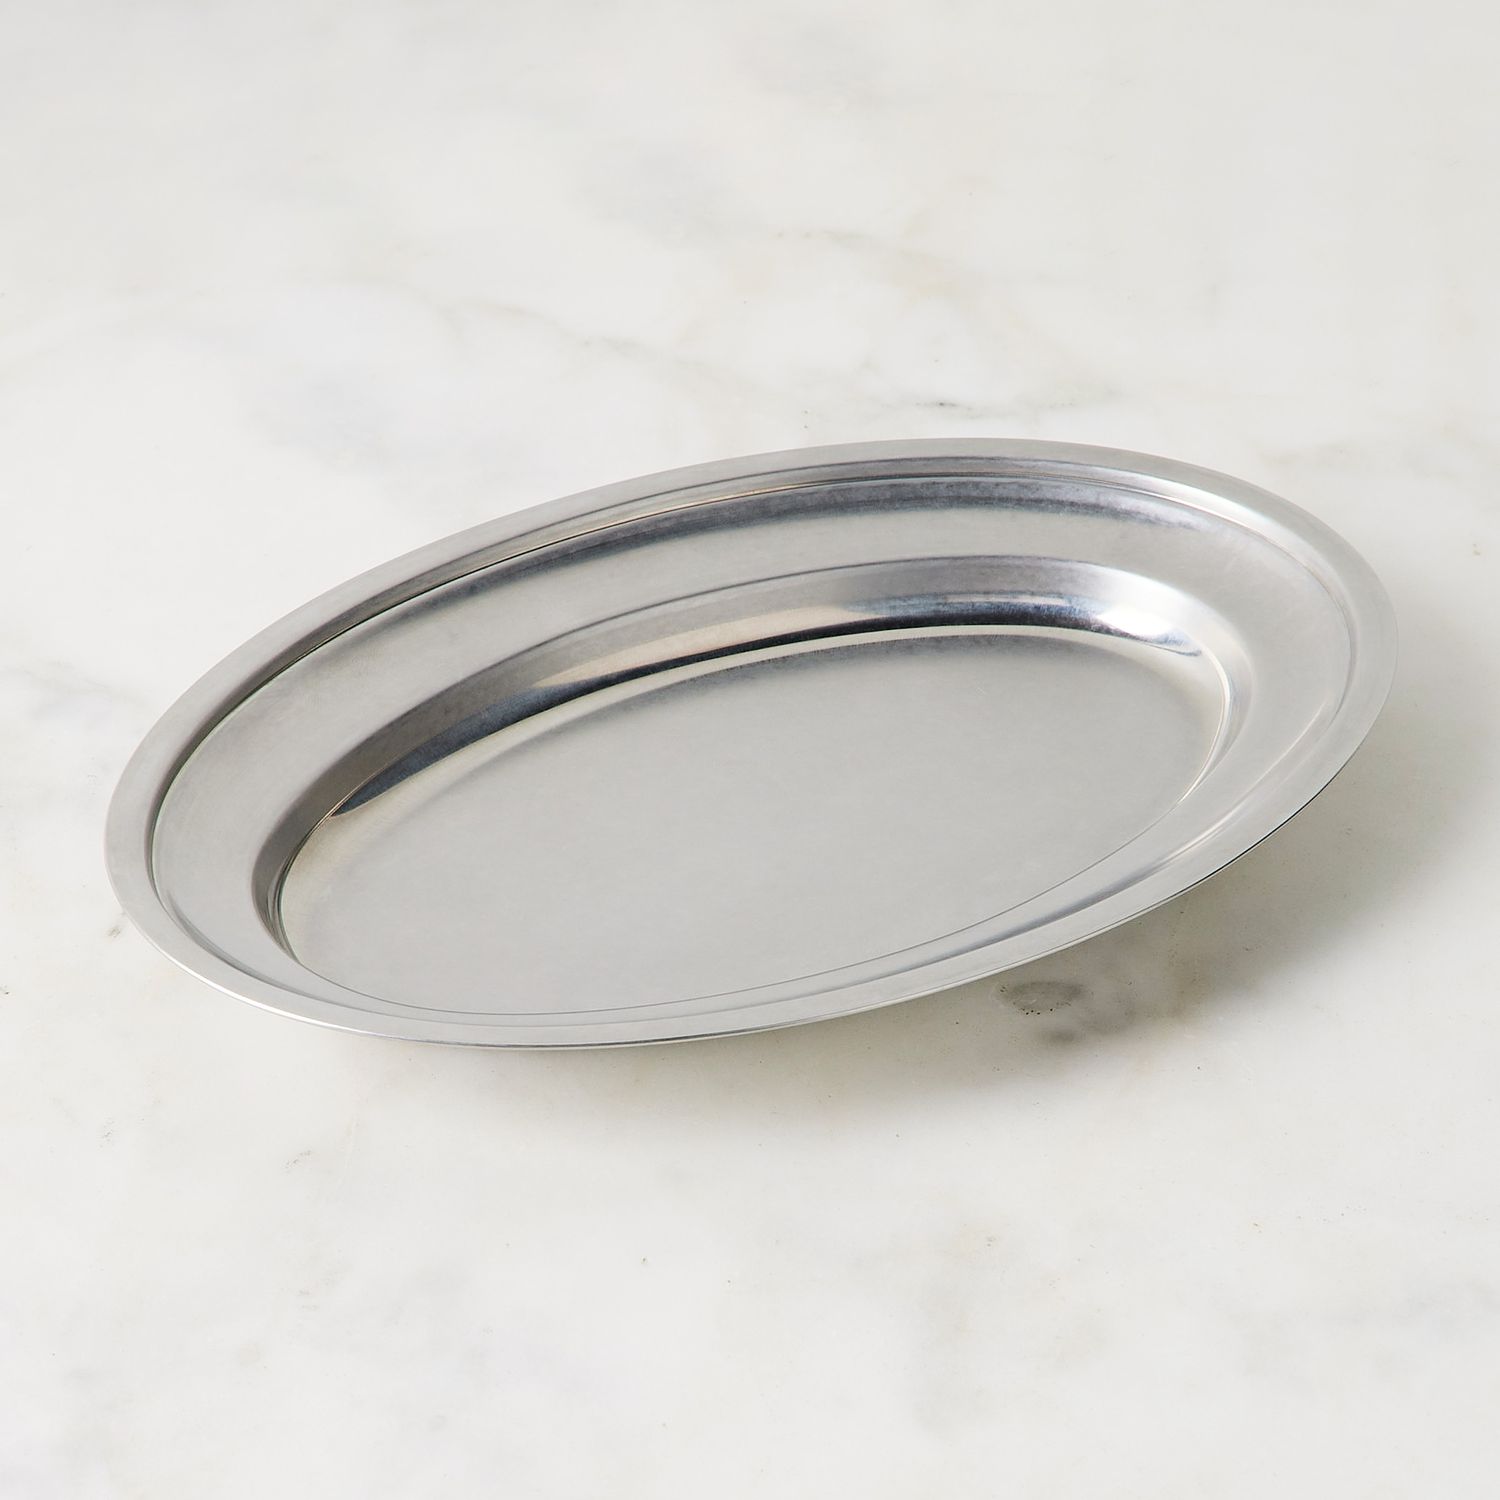 Mepra Original Vintage Oval Tray, Stainless Steel, Made in Italy